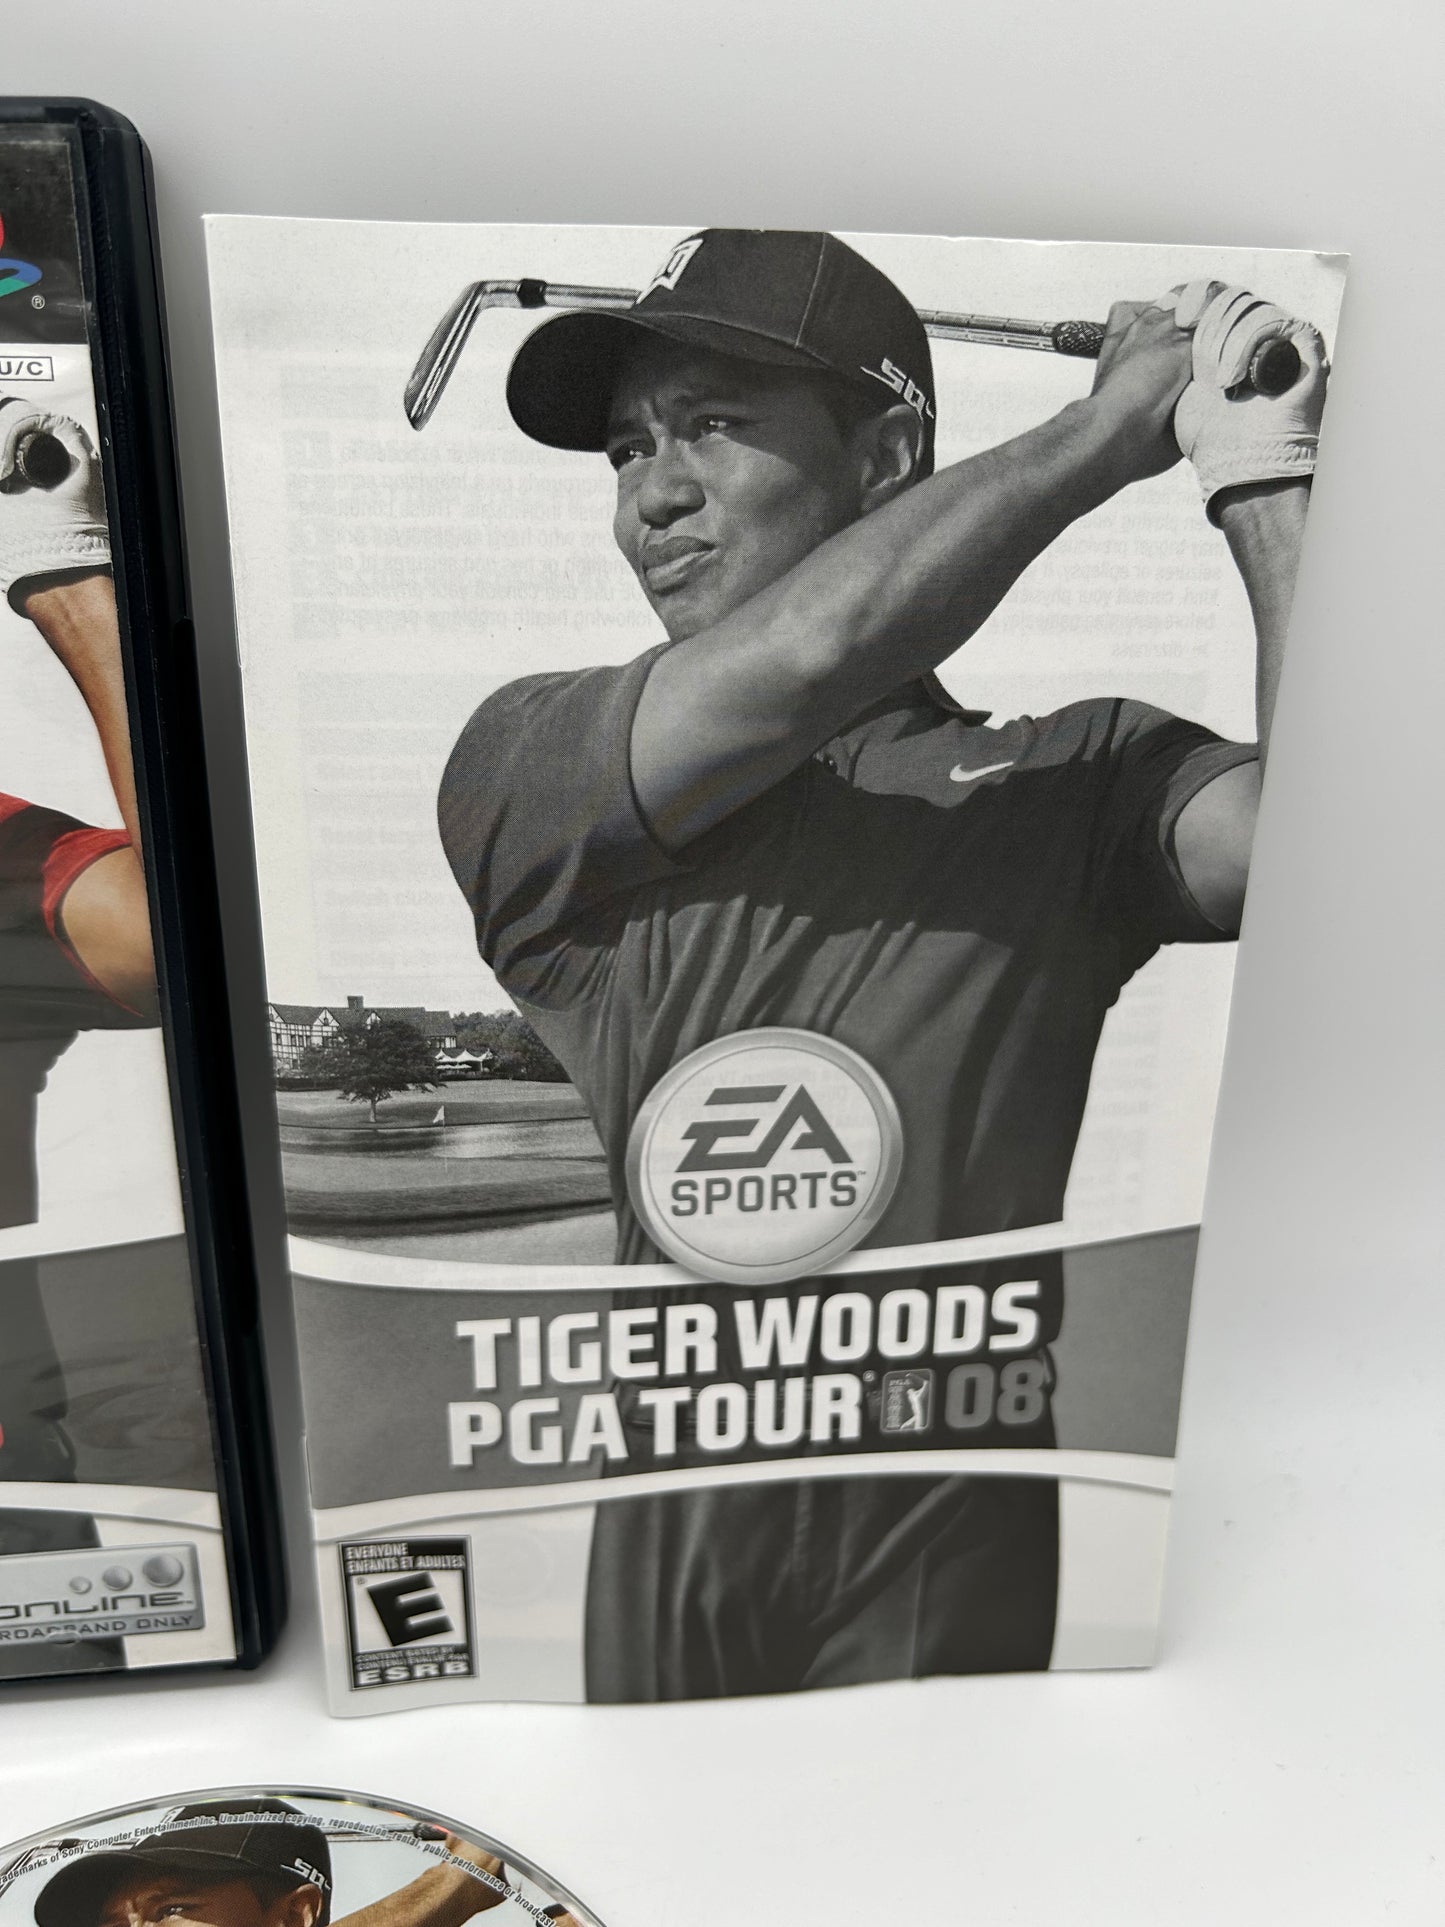 SONY PLAYSTATiON 2 [PS2] | TiGER WOODS PGA TOUR 08